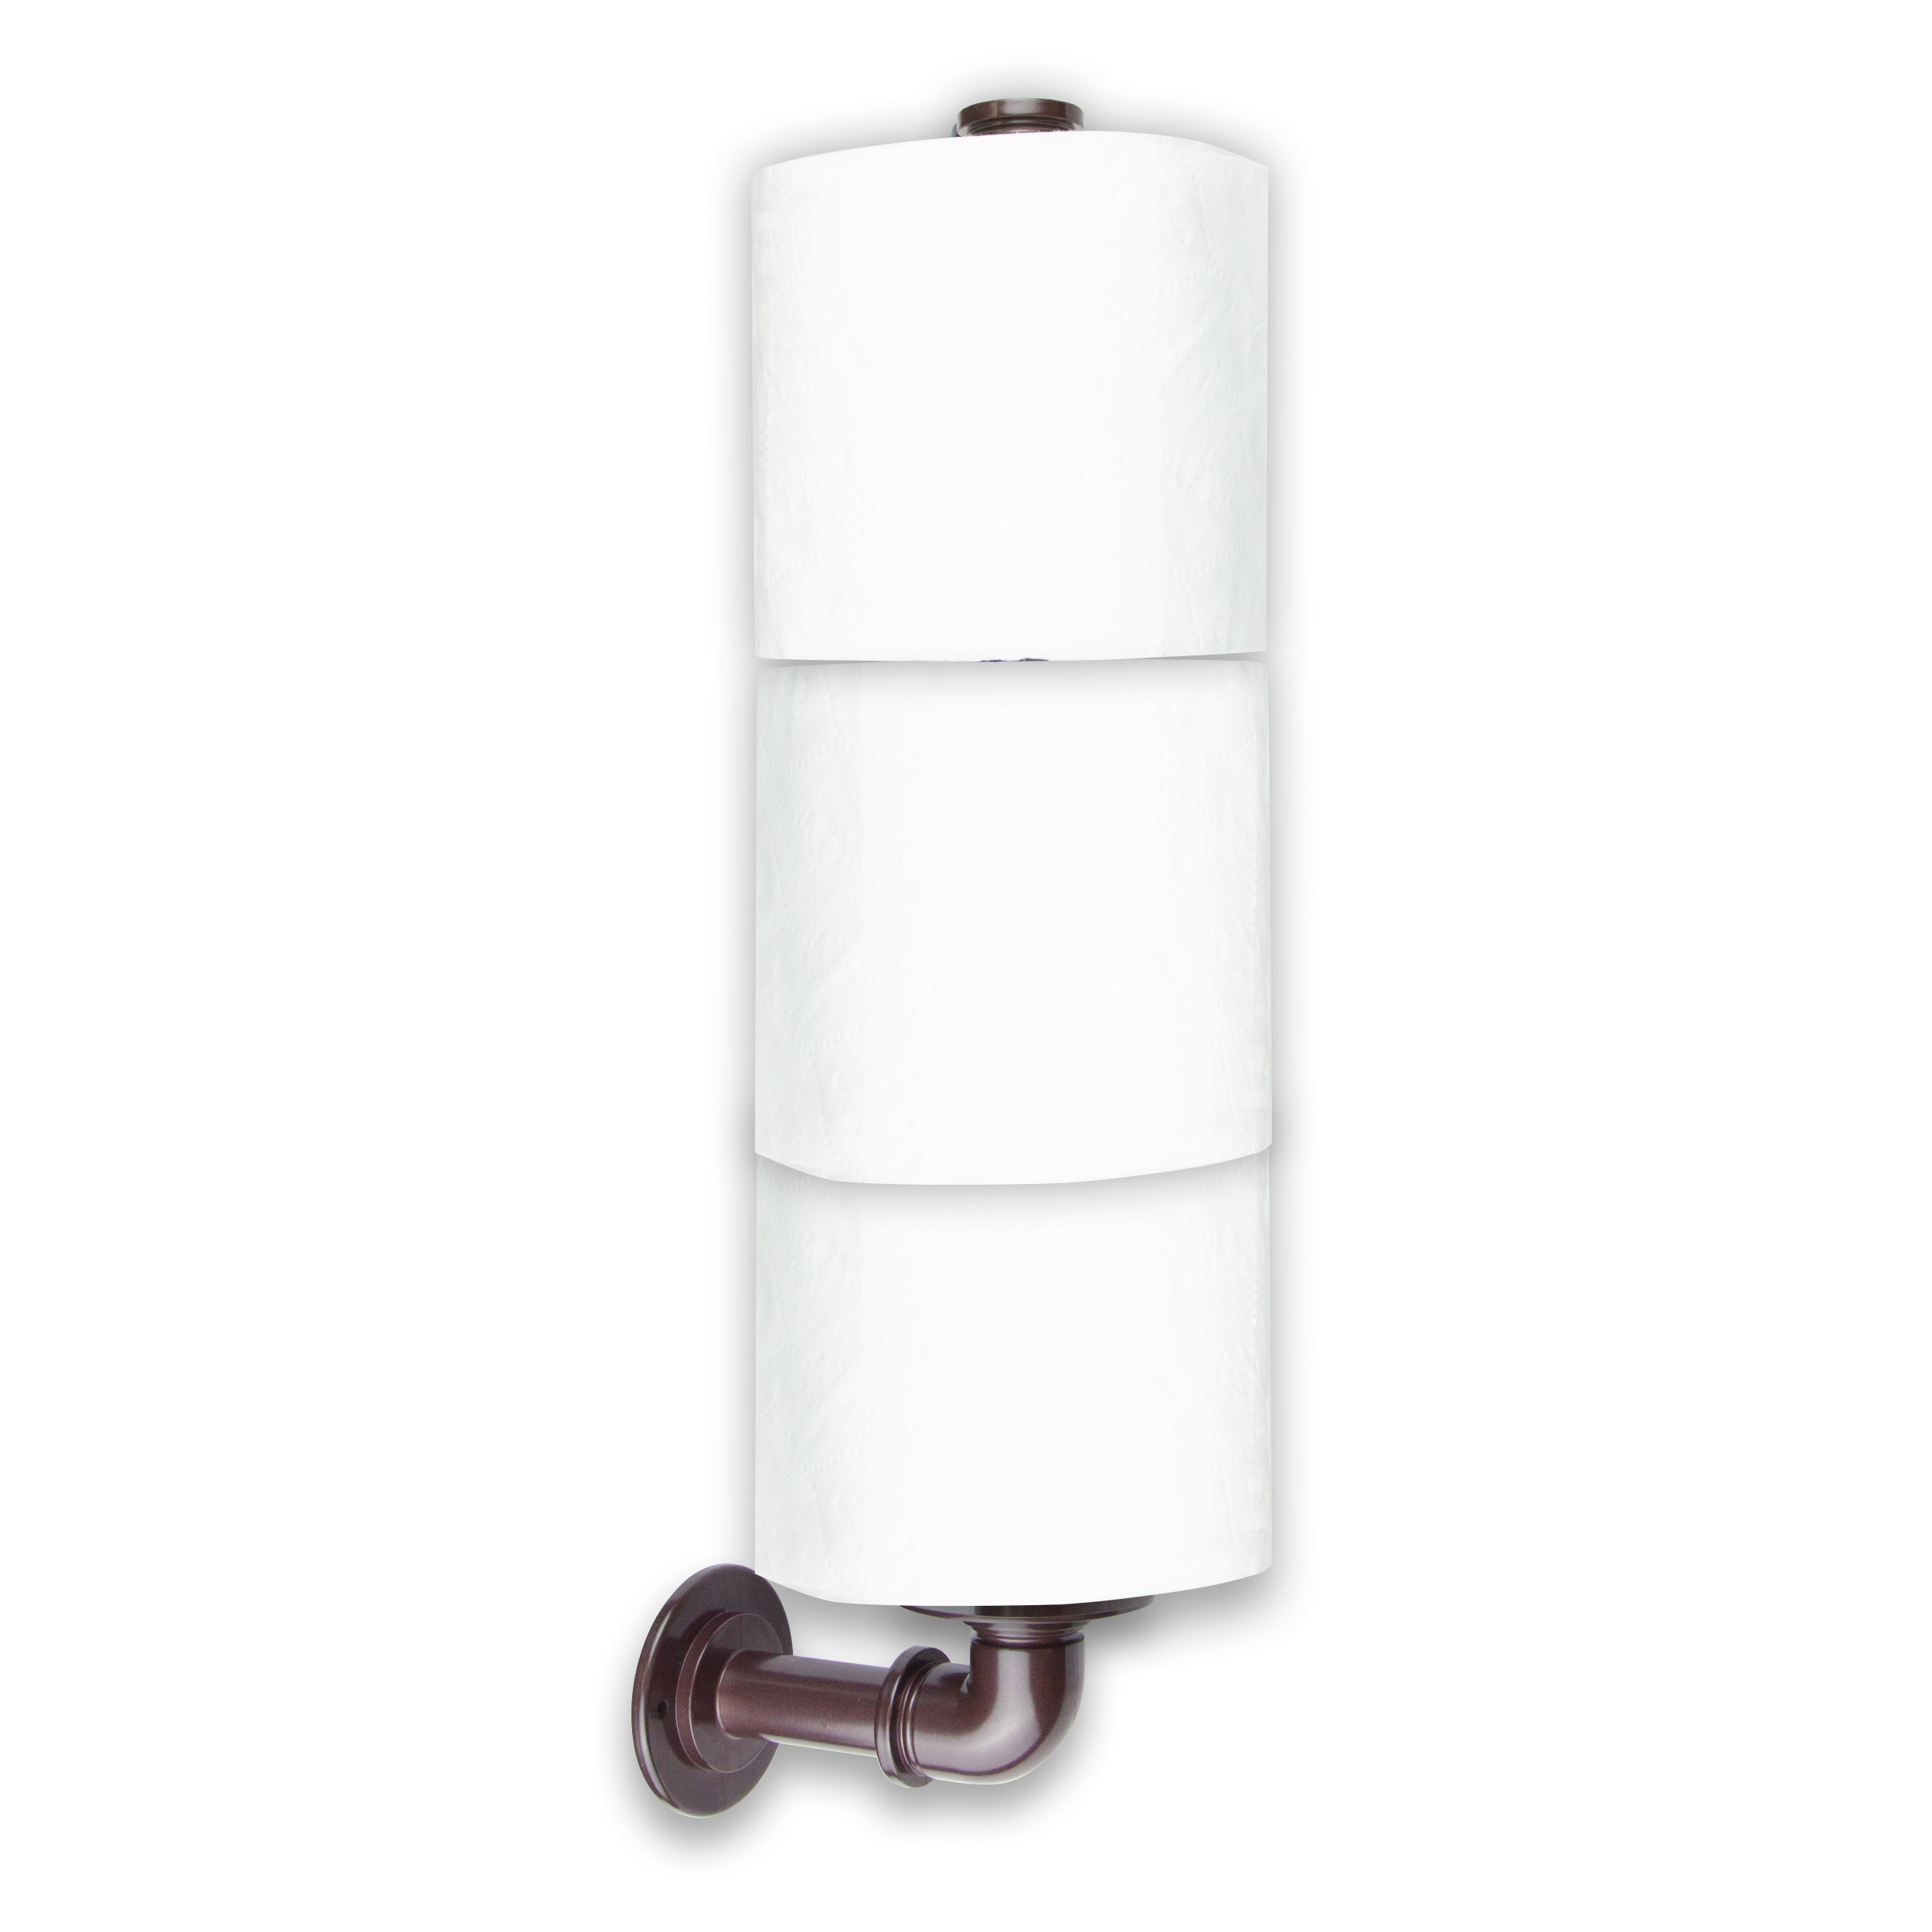 Paper Towel Holder With Spray Bottle,hanging Wall Mount